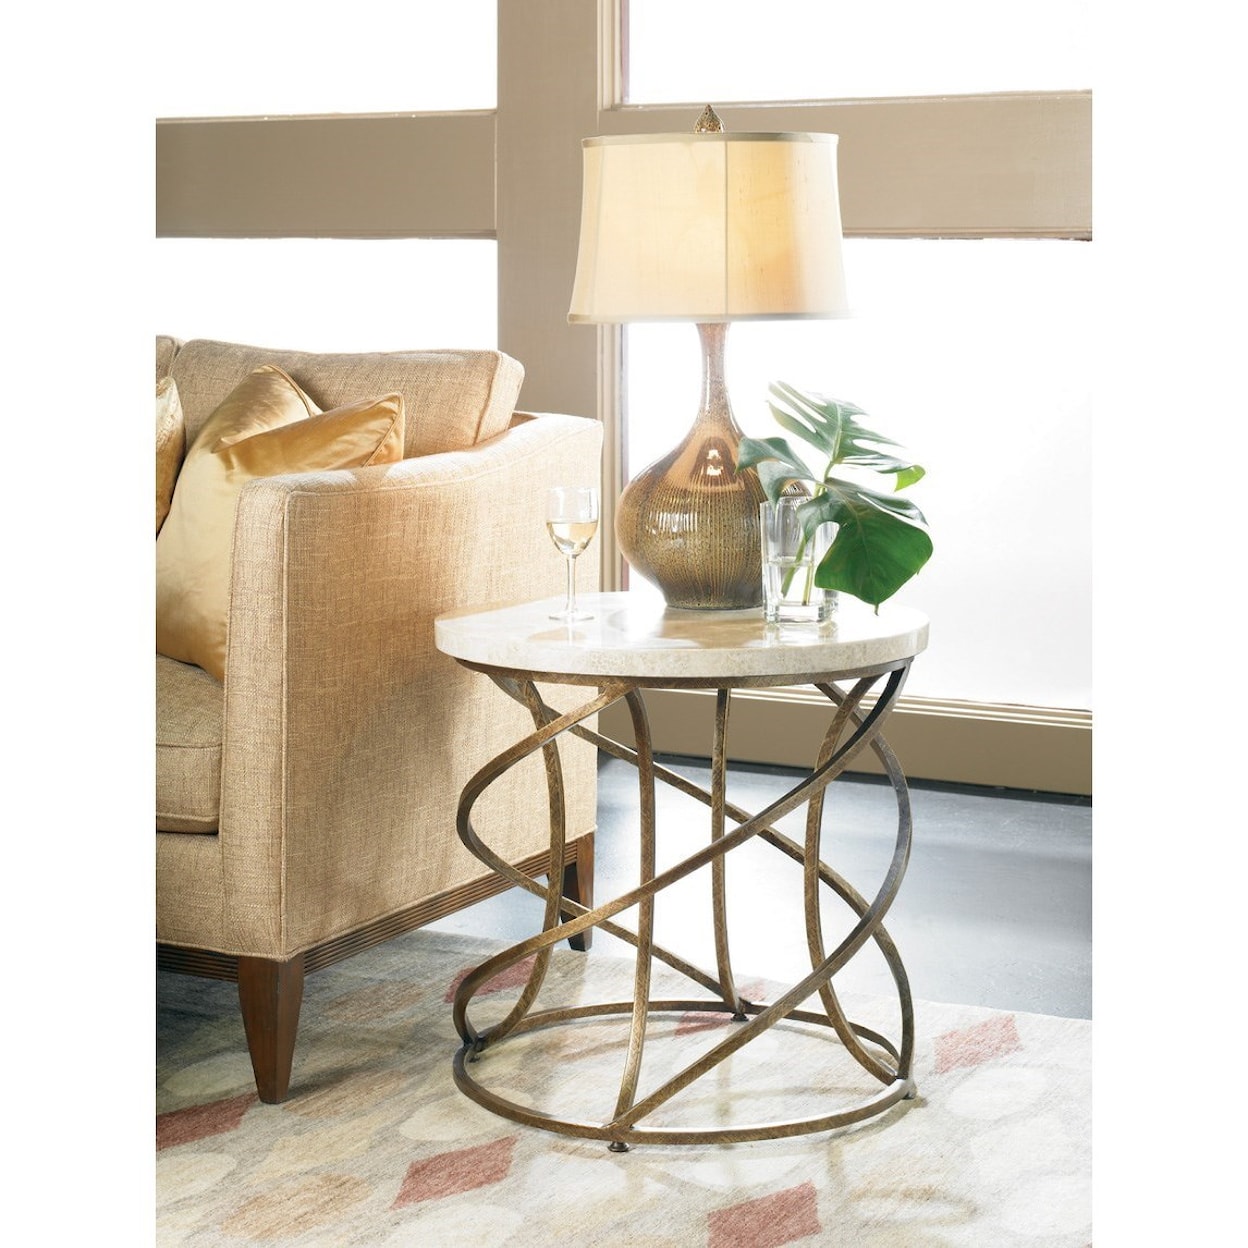 CTH Sherrill Occasional Masterpiece - Boing Round Lamp Table